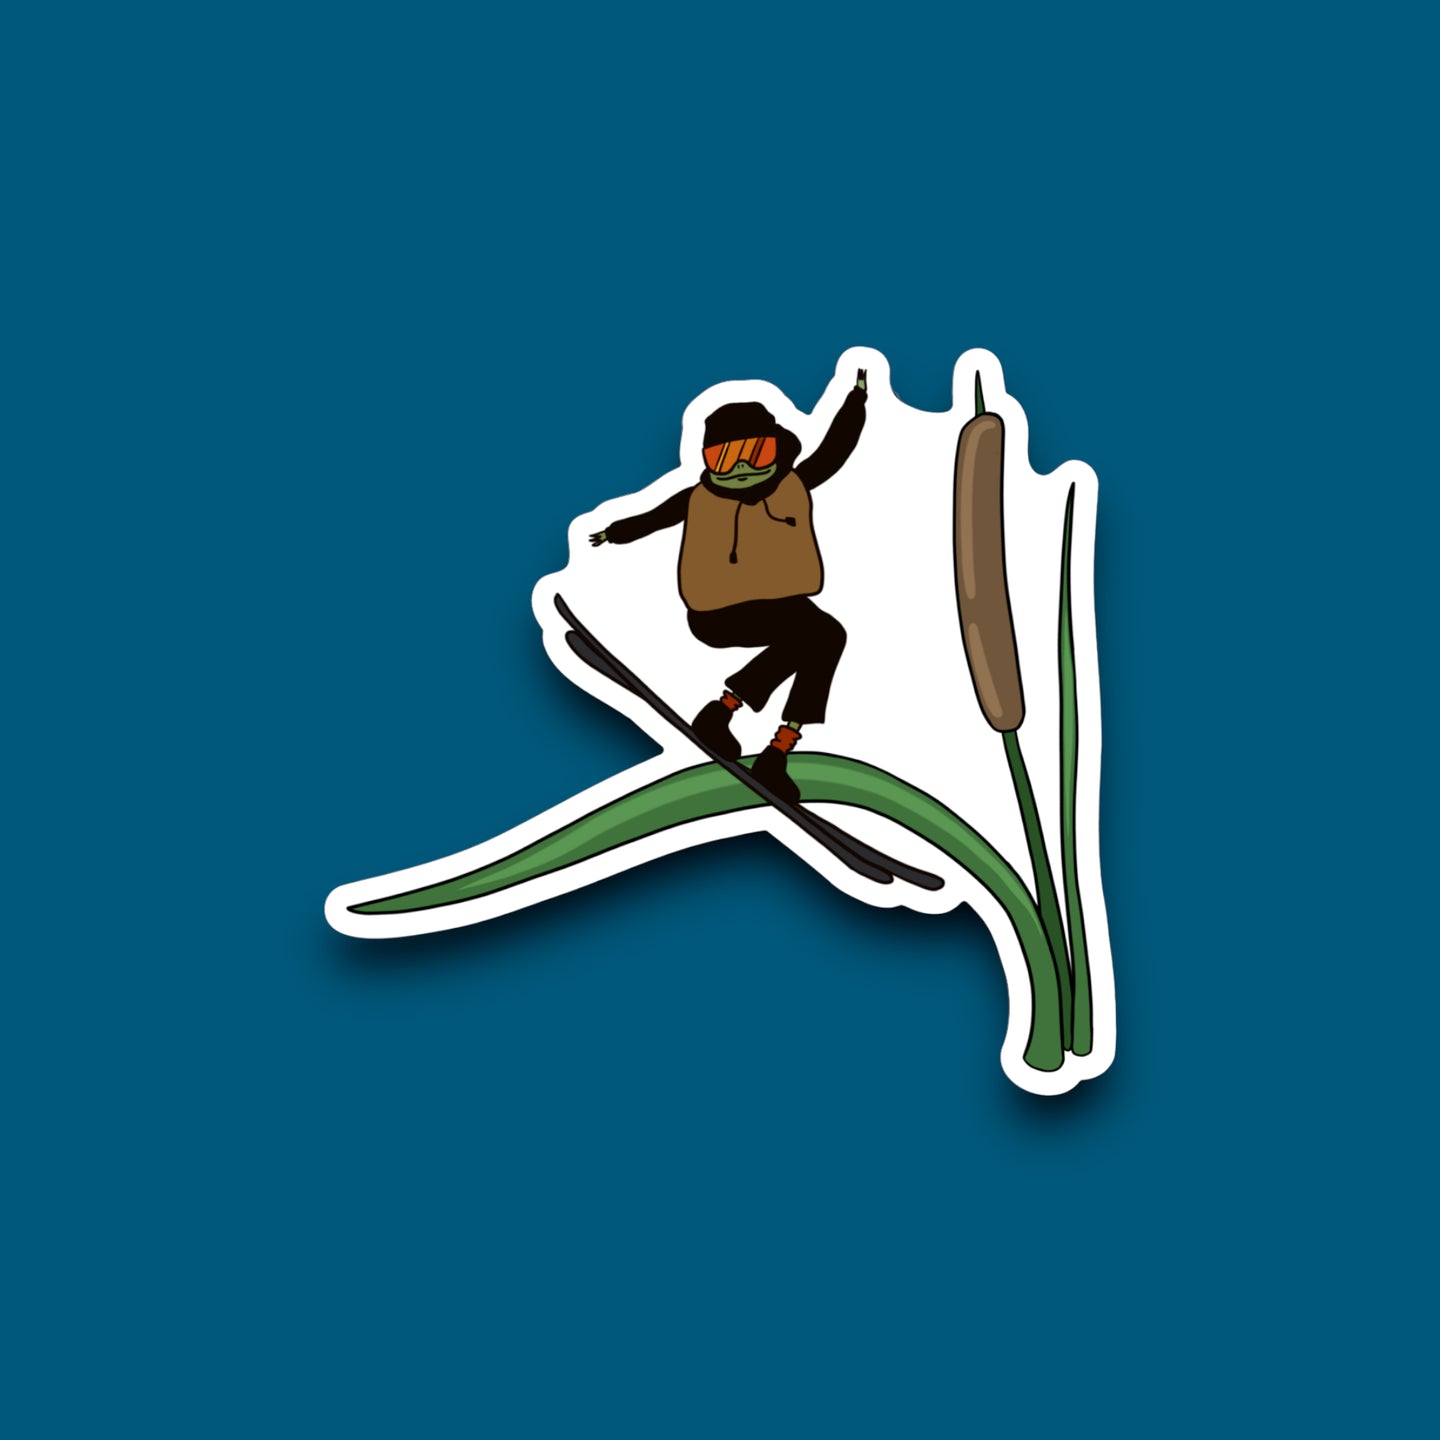 Plant Skiing Frog Sticker